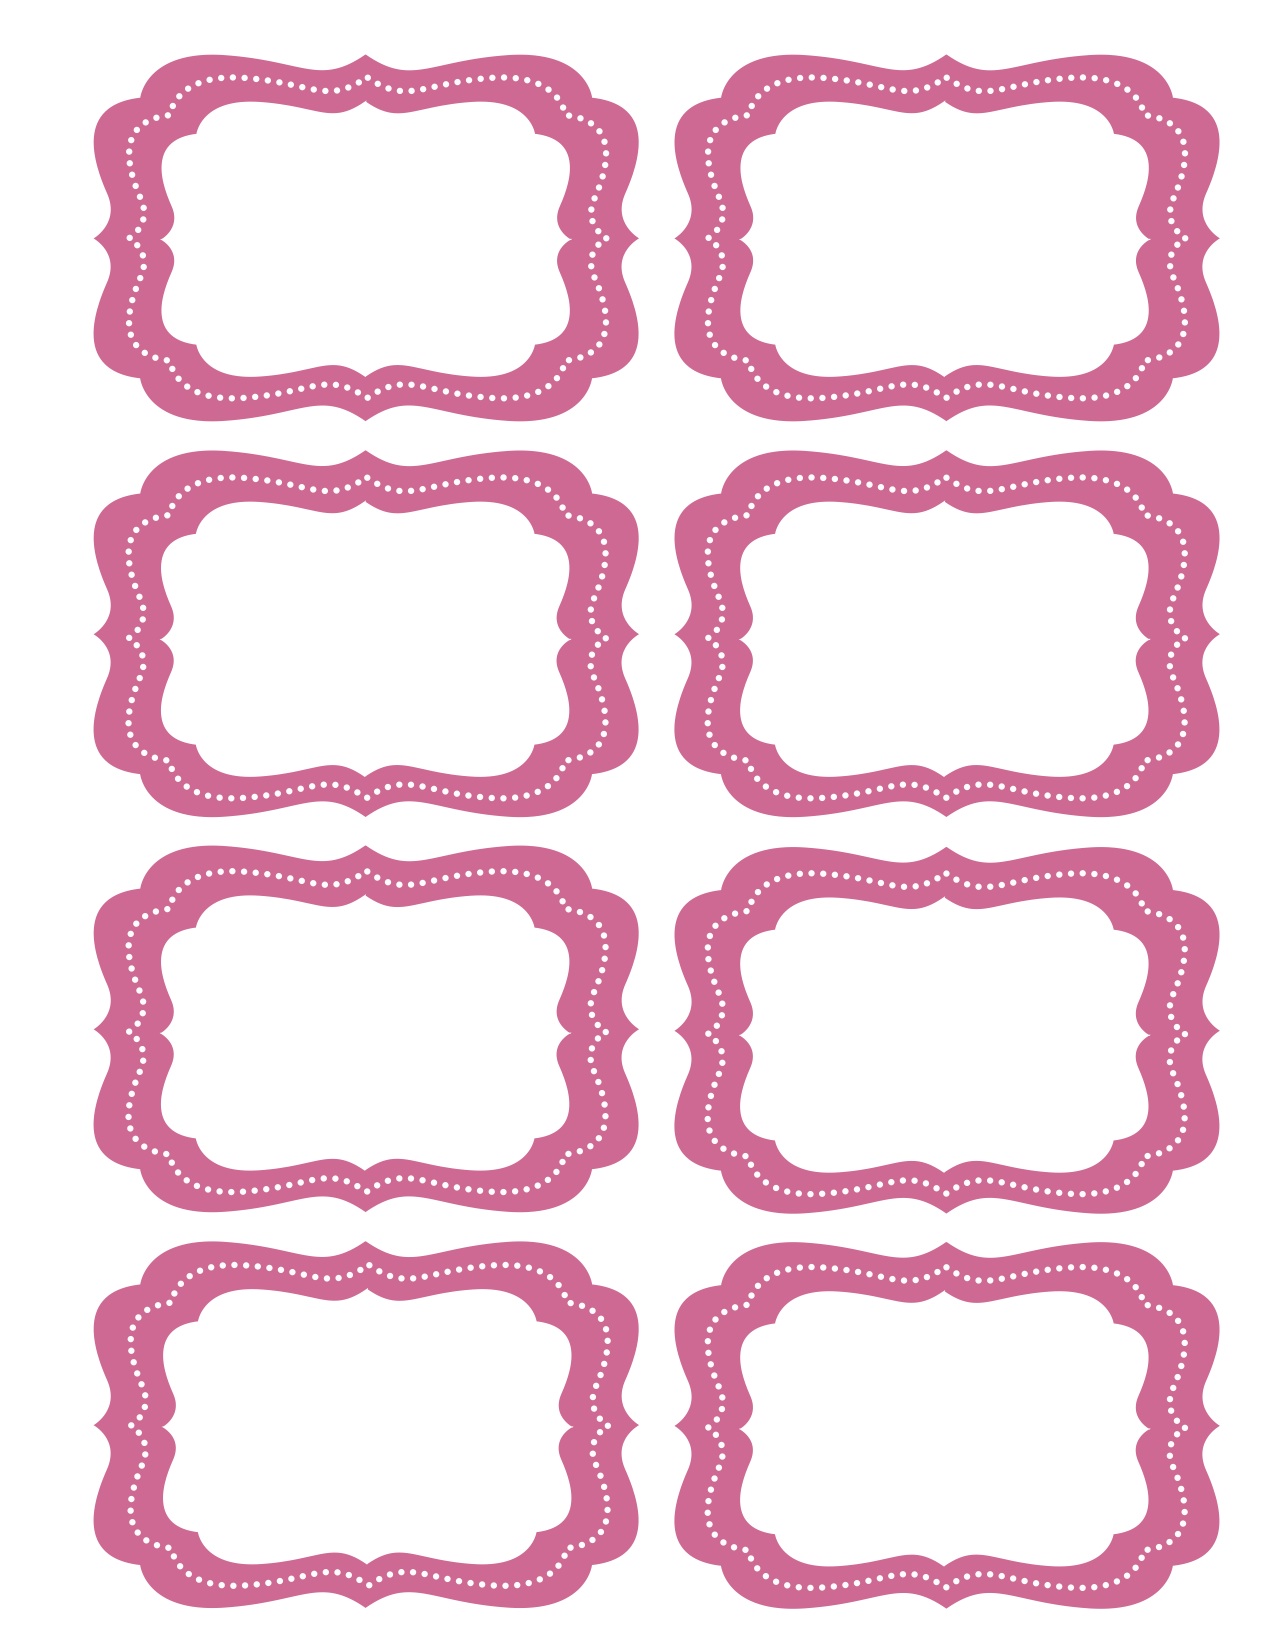 candy-labels-blank-free-images-at-clker-vector-clip-art-online